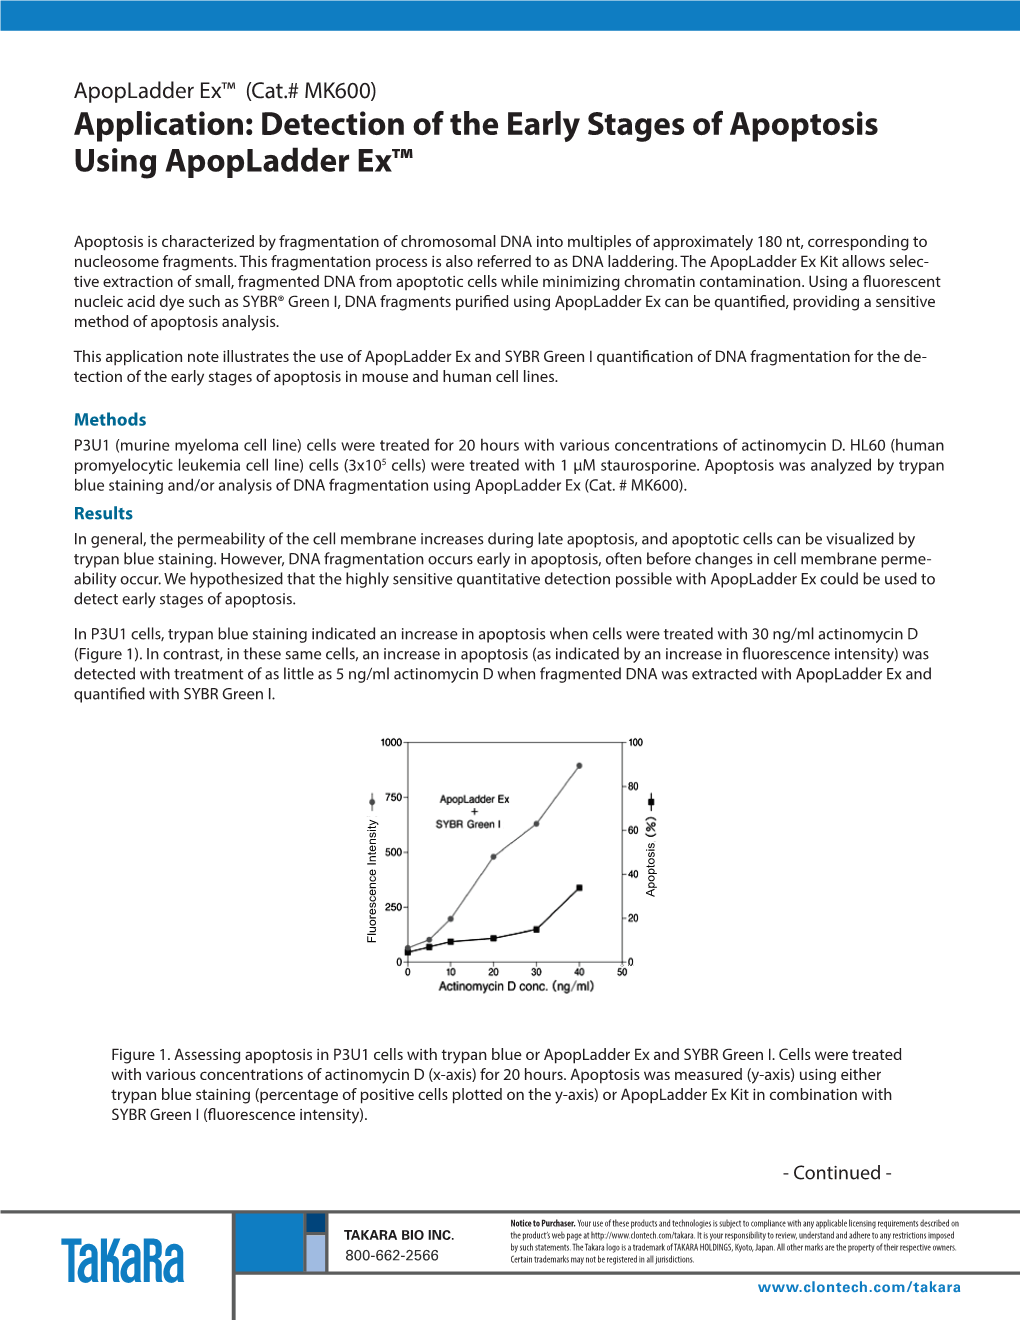 Application: Detection of the Early Stages of Apoptosis Using Apopladder Ex™